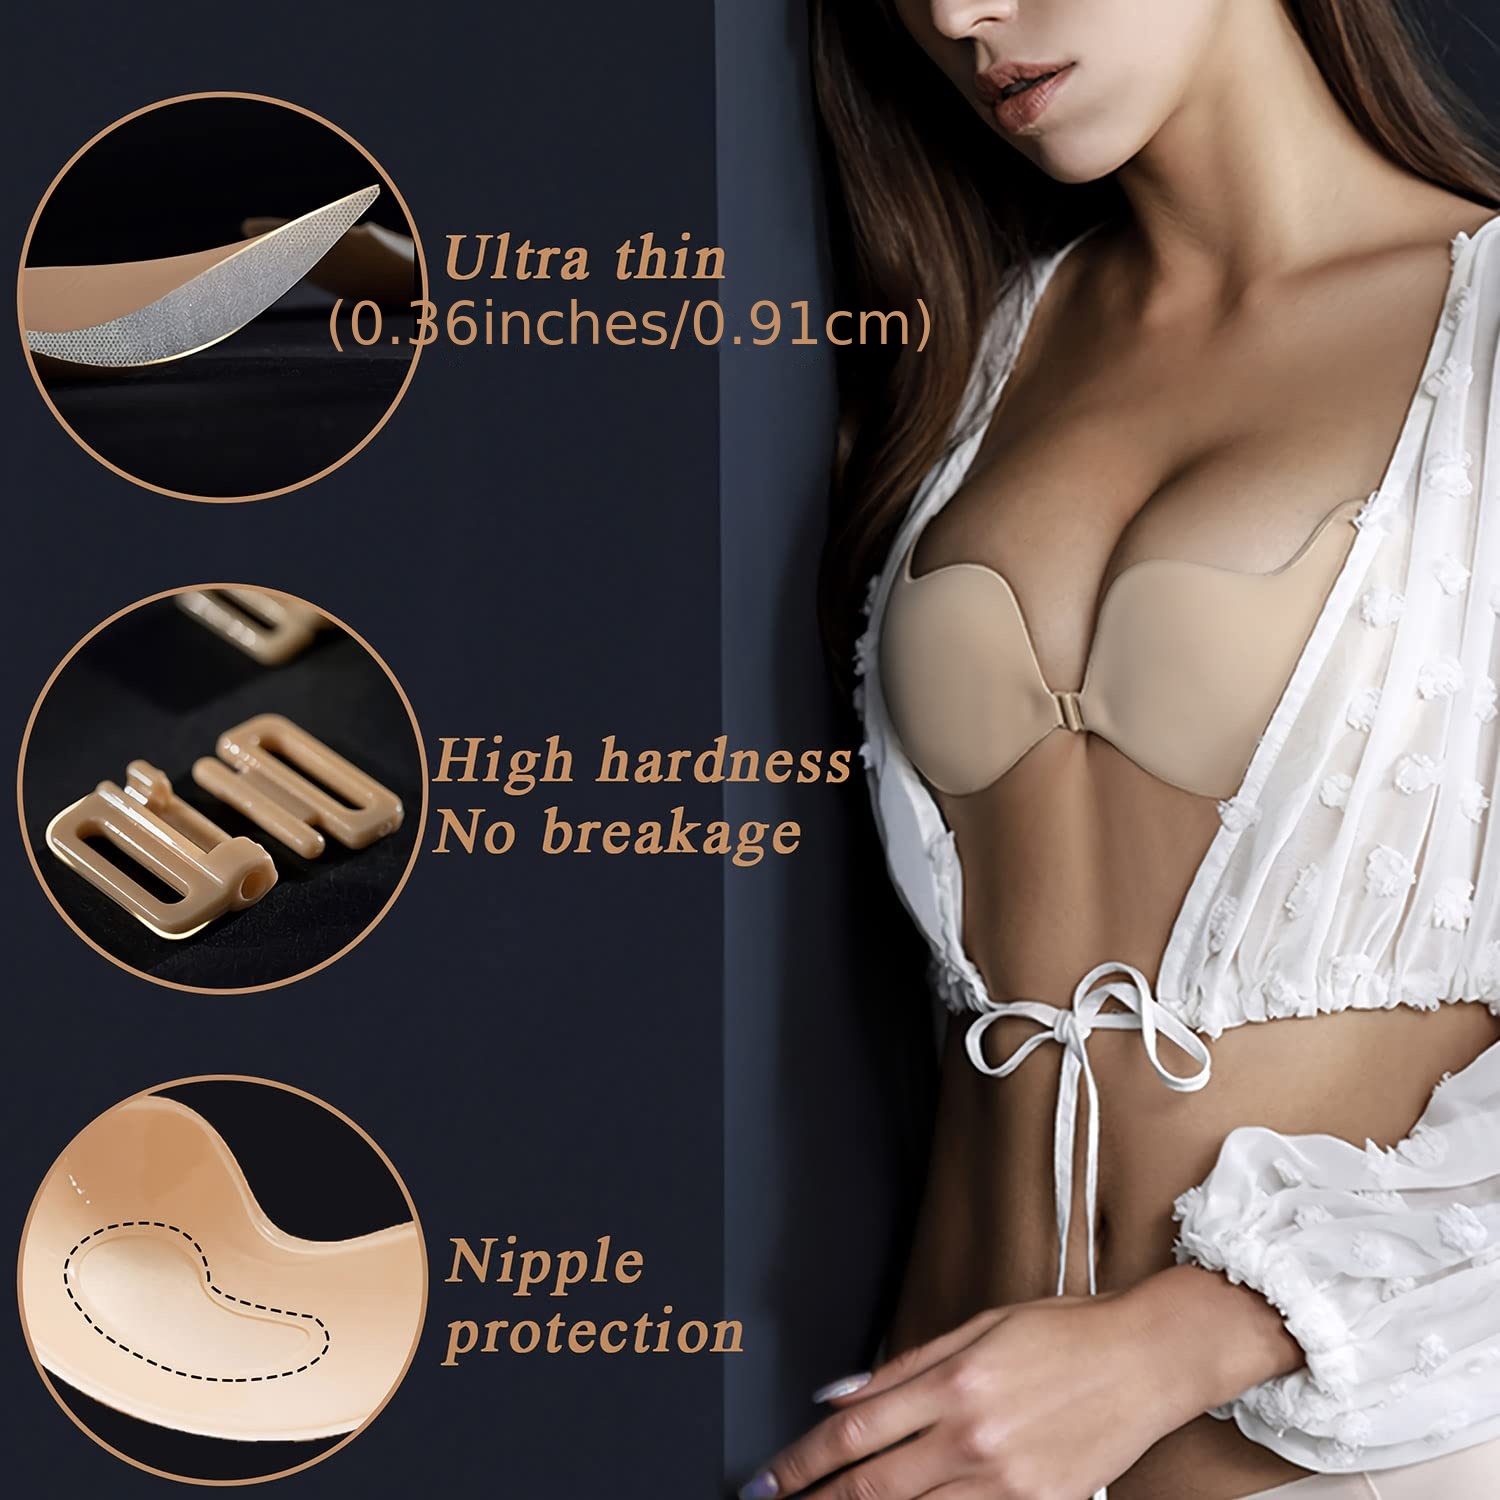 Sticky Bra, Strapless Backless Bras For Women, Adhesive Invisible